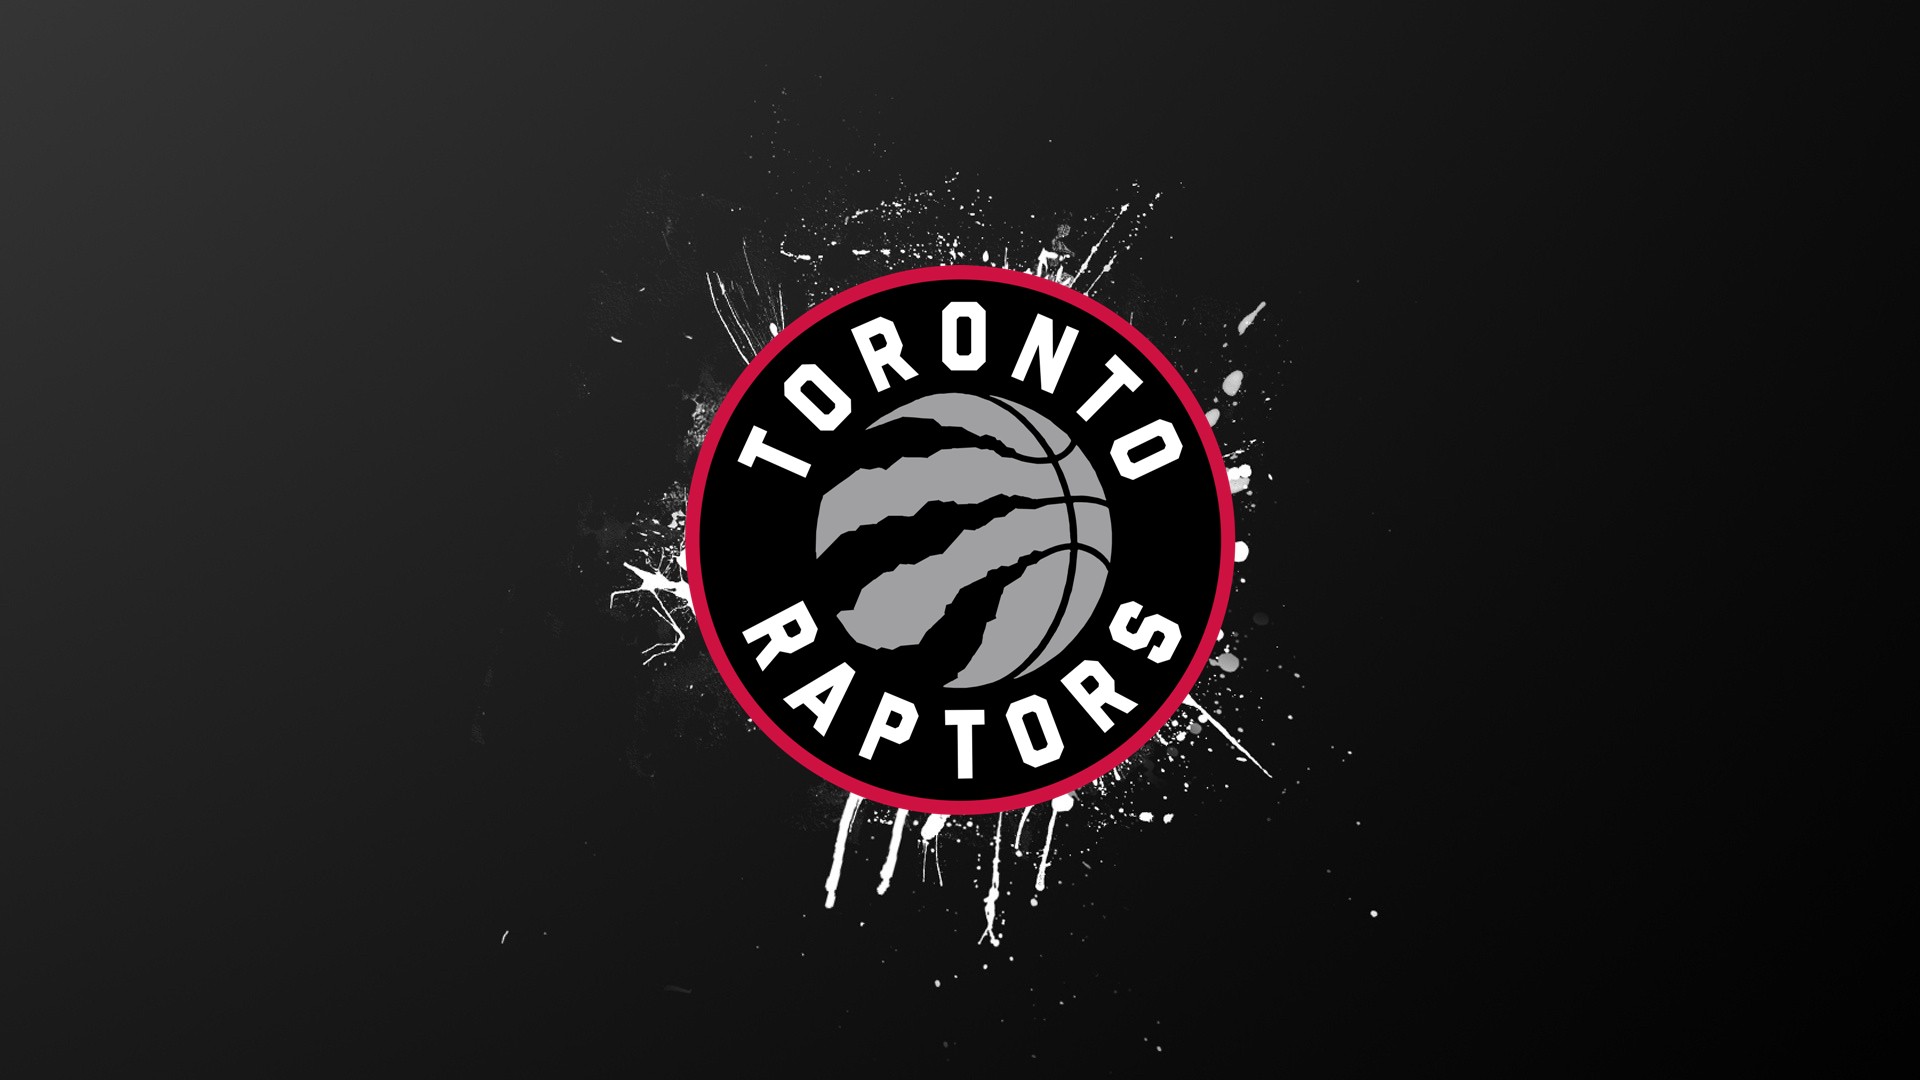 Raptors Basketball Wallpaper HD with image dimensions 1920x1080 pixel. You can make this wallpaper for your Desktop Computer Backgrounds, Windows or Mac Screensavers, iPhone Lock screen, Tablet or Android and another Mobile Phone device